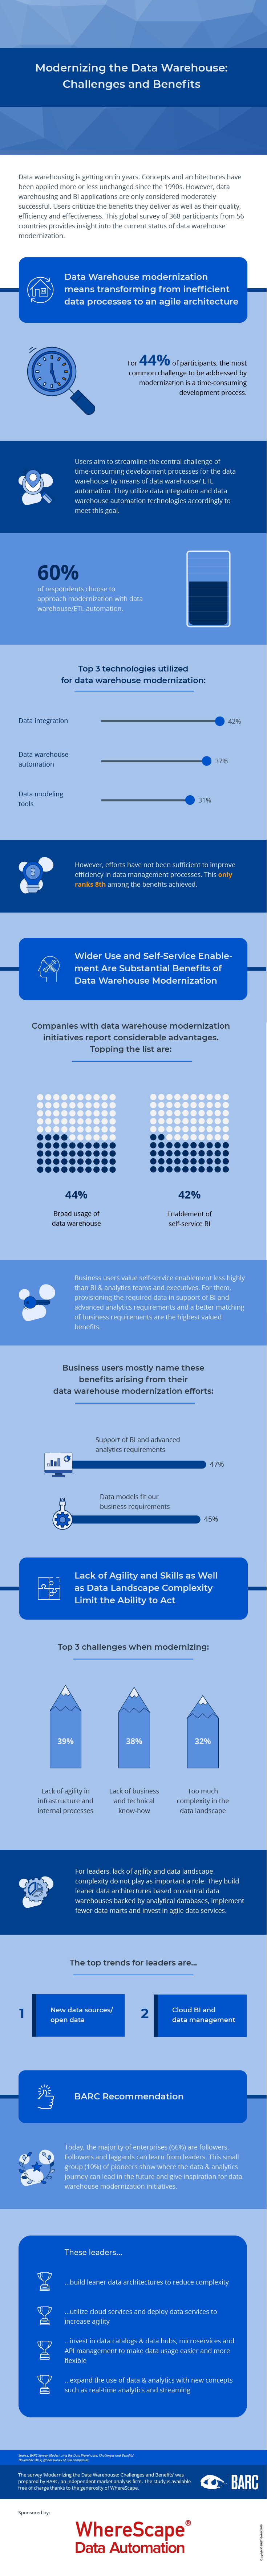 Infographic: Data Warehouse Modernization - Why it is important and how it can benefit organizations